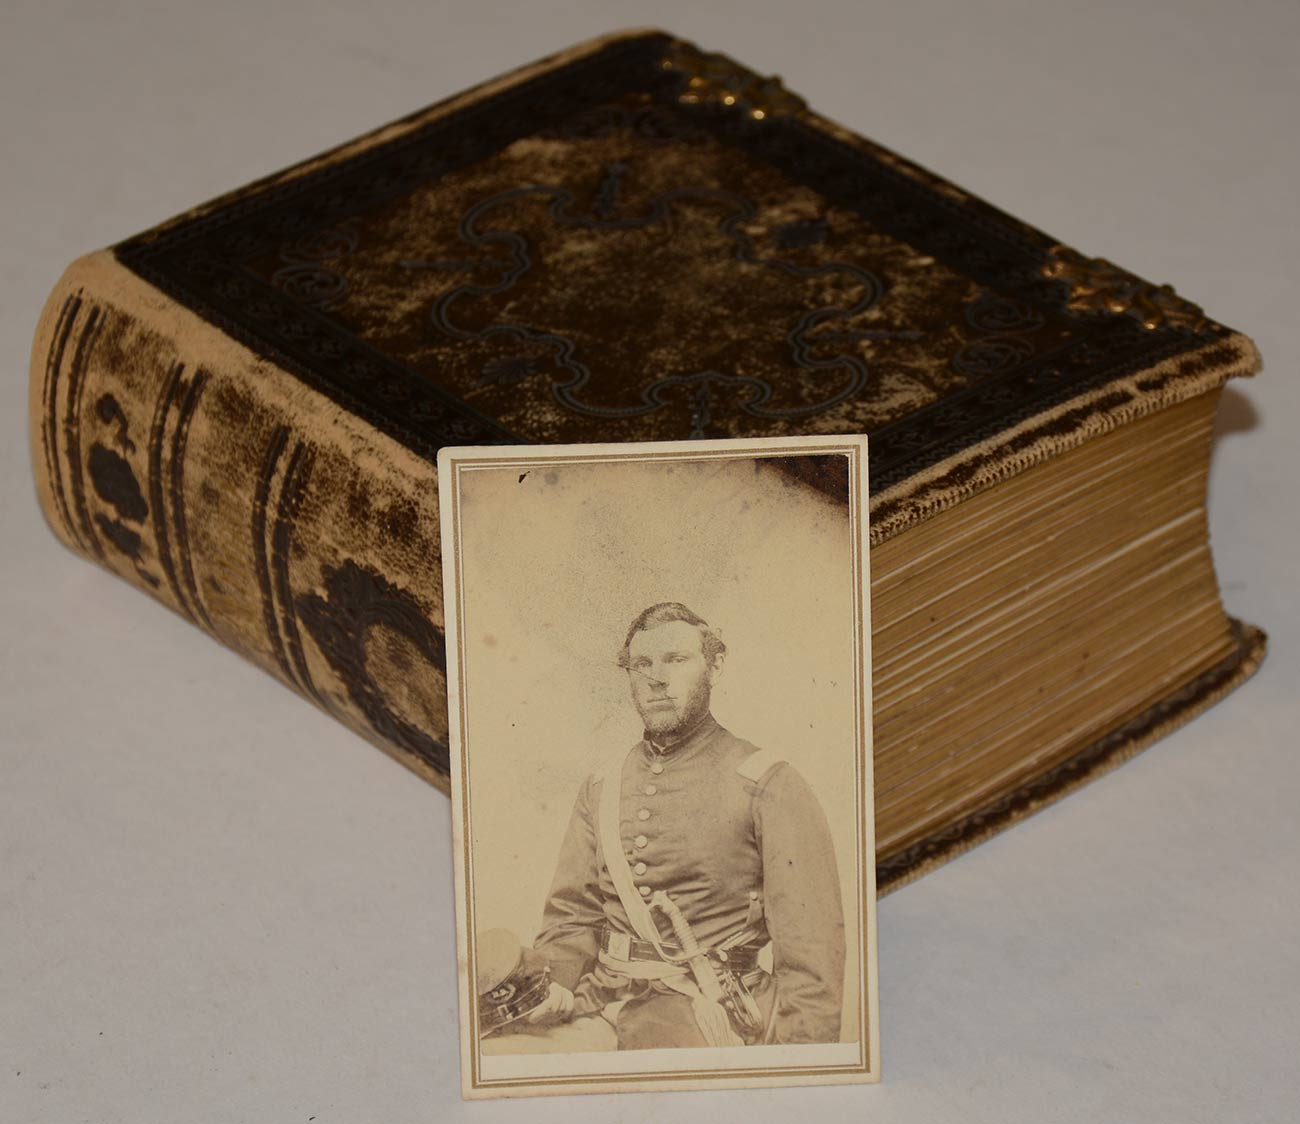 CDV OF 121ST & 152ND NEW YORK OFFICER WOUNDED AT SPOTSYLVANIA, WITH PHOTO ALBUM